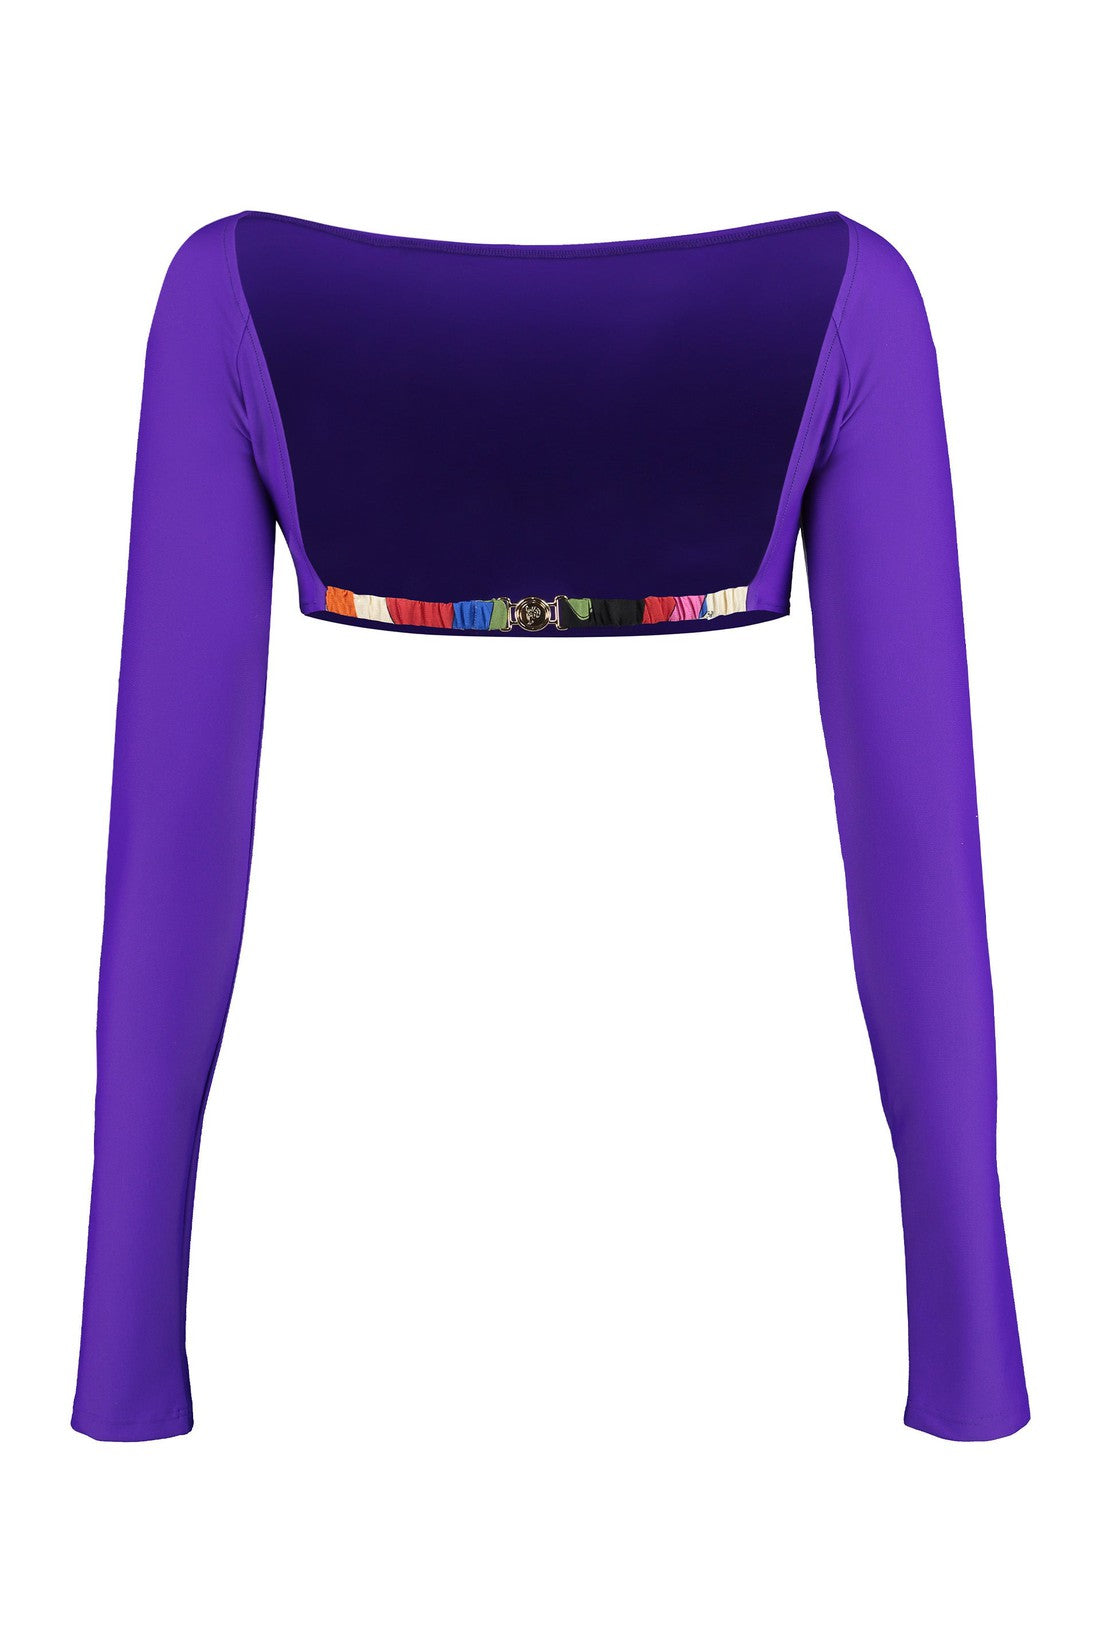 Emilio Pucci-OUTLET-SALE-Knitted crop top-ARCHIVIST